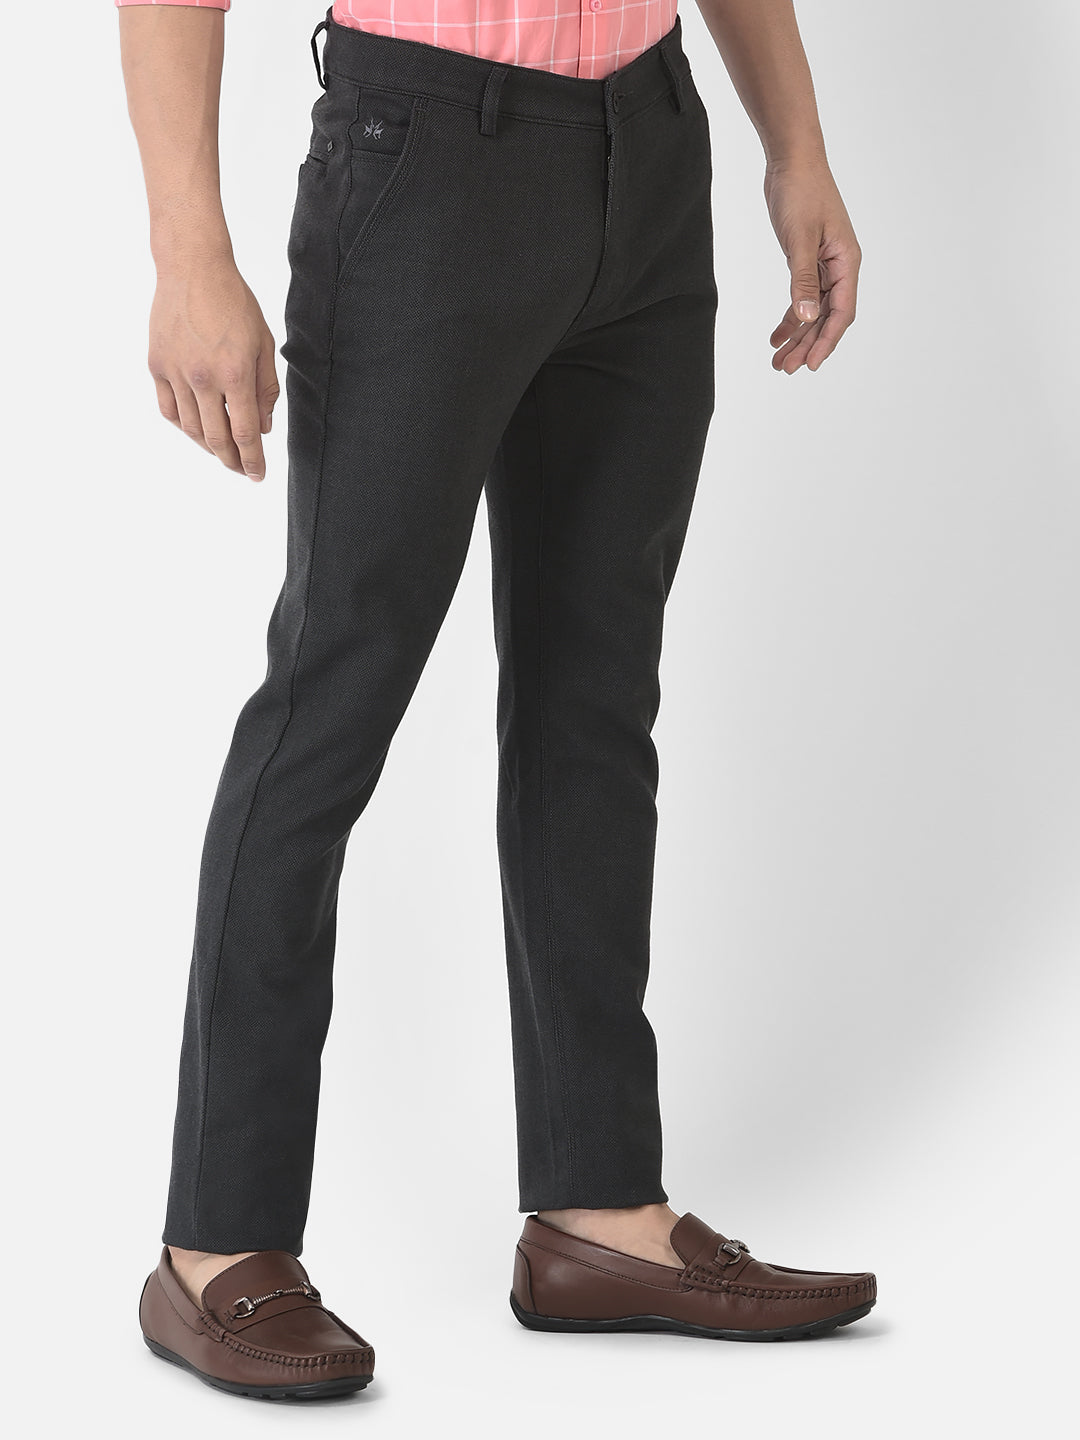  Dark Grey Trousers with Textured Print